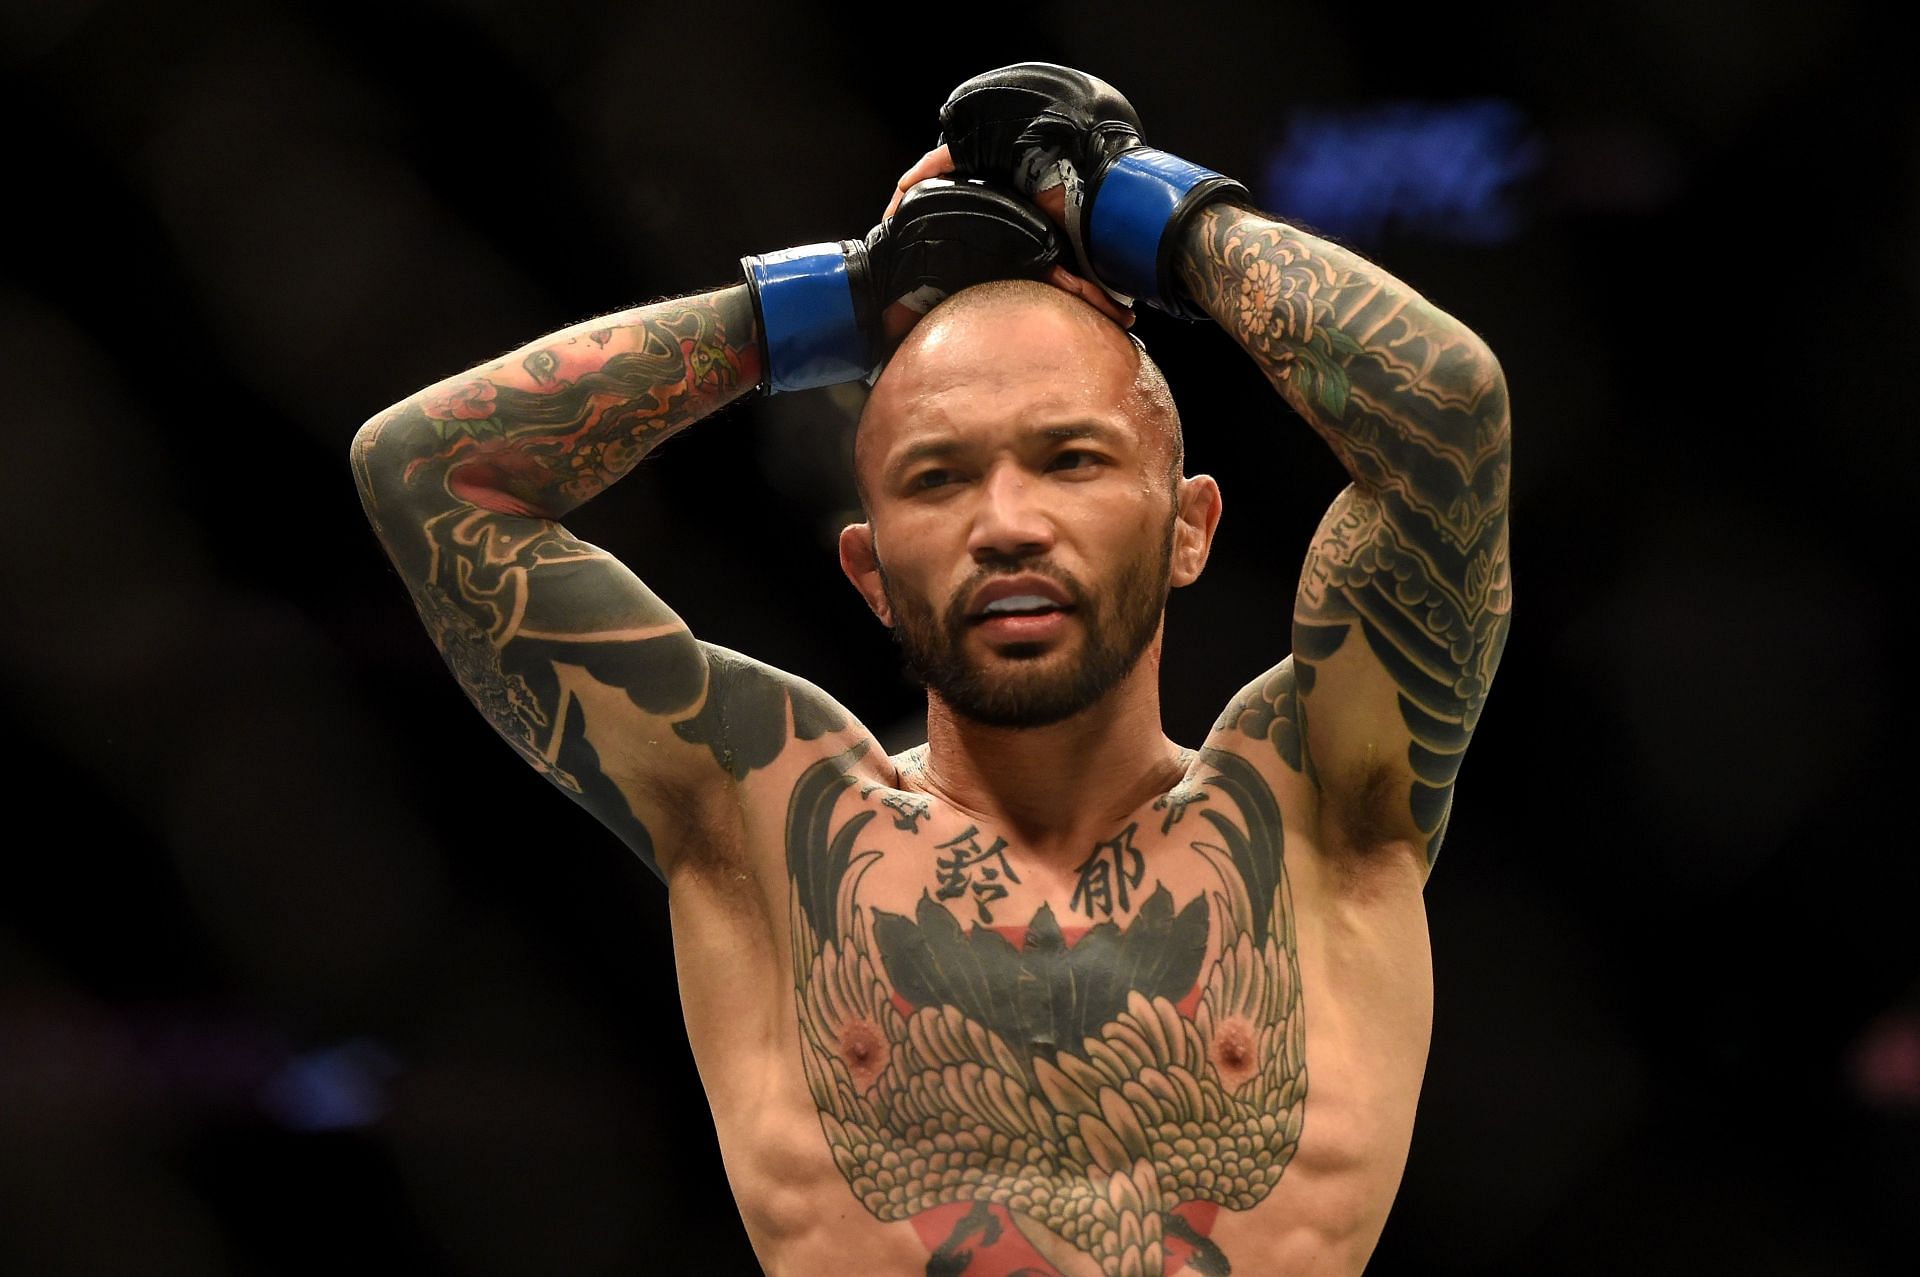 The late Kid Yamamoto was past his best when he arrived in the octagon